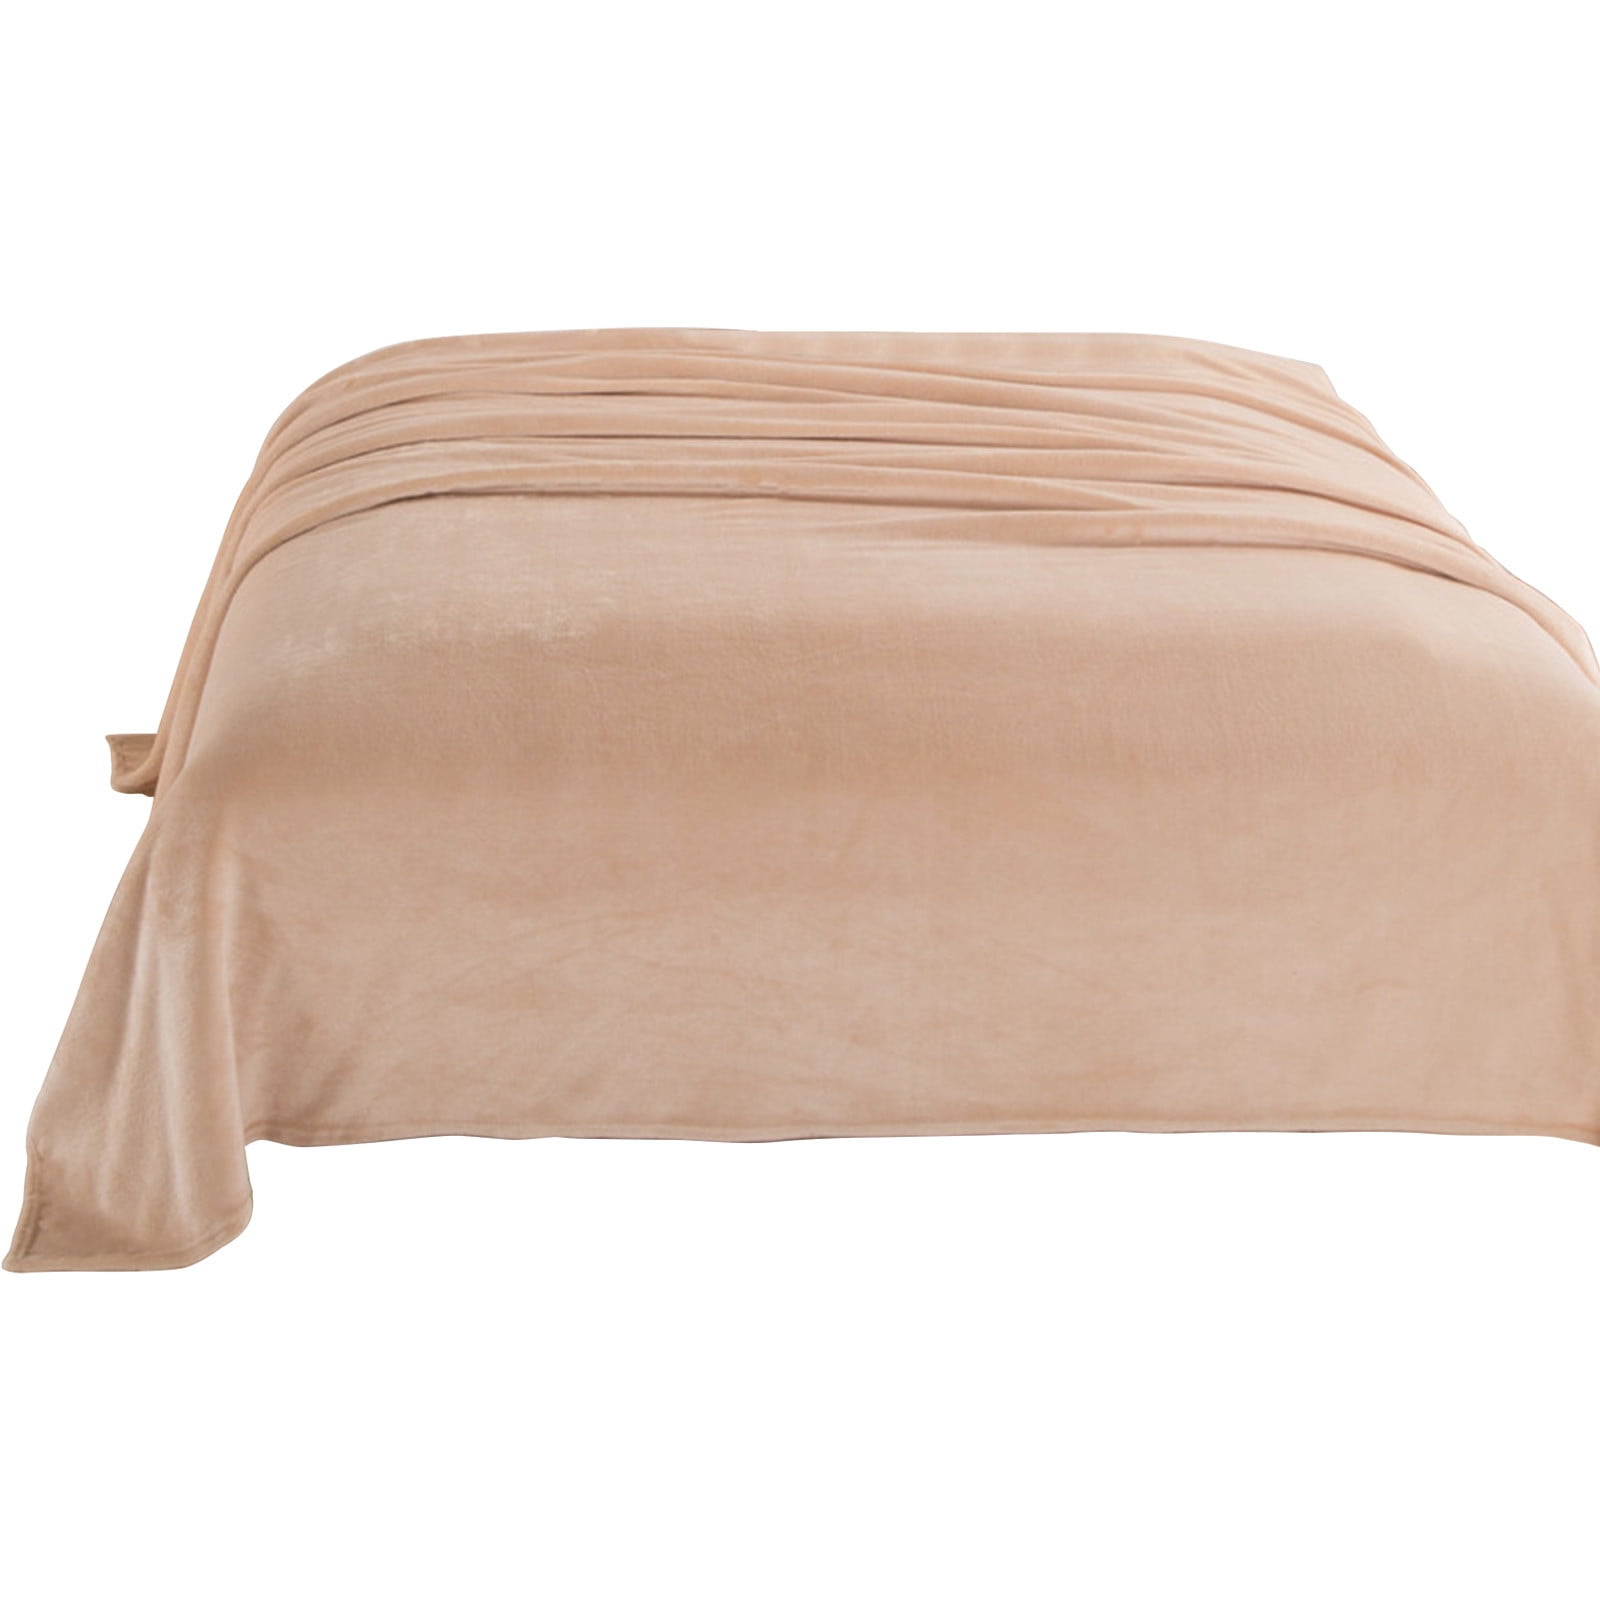 Blanket Plain Cover Blanket Yoga Blanket, Suitable For Rooms With ...